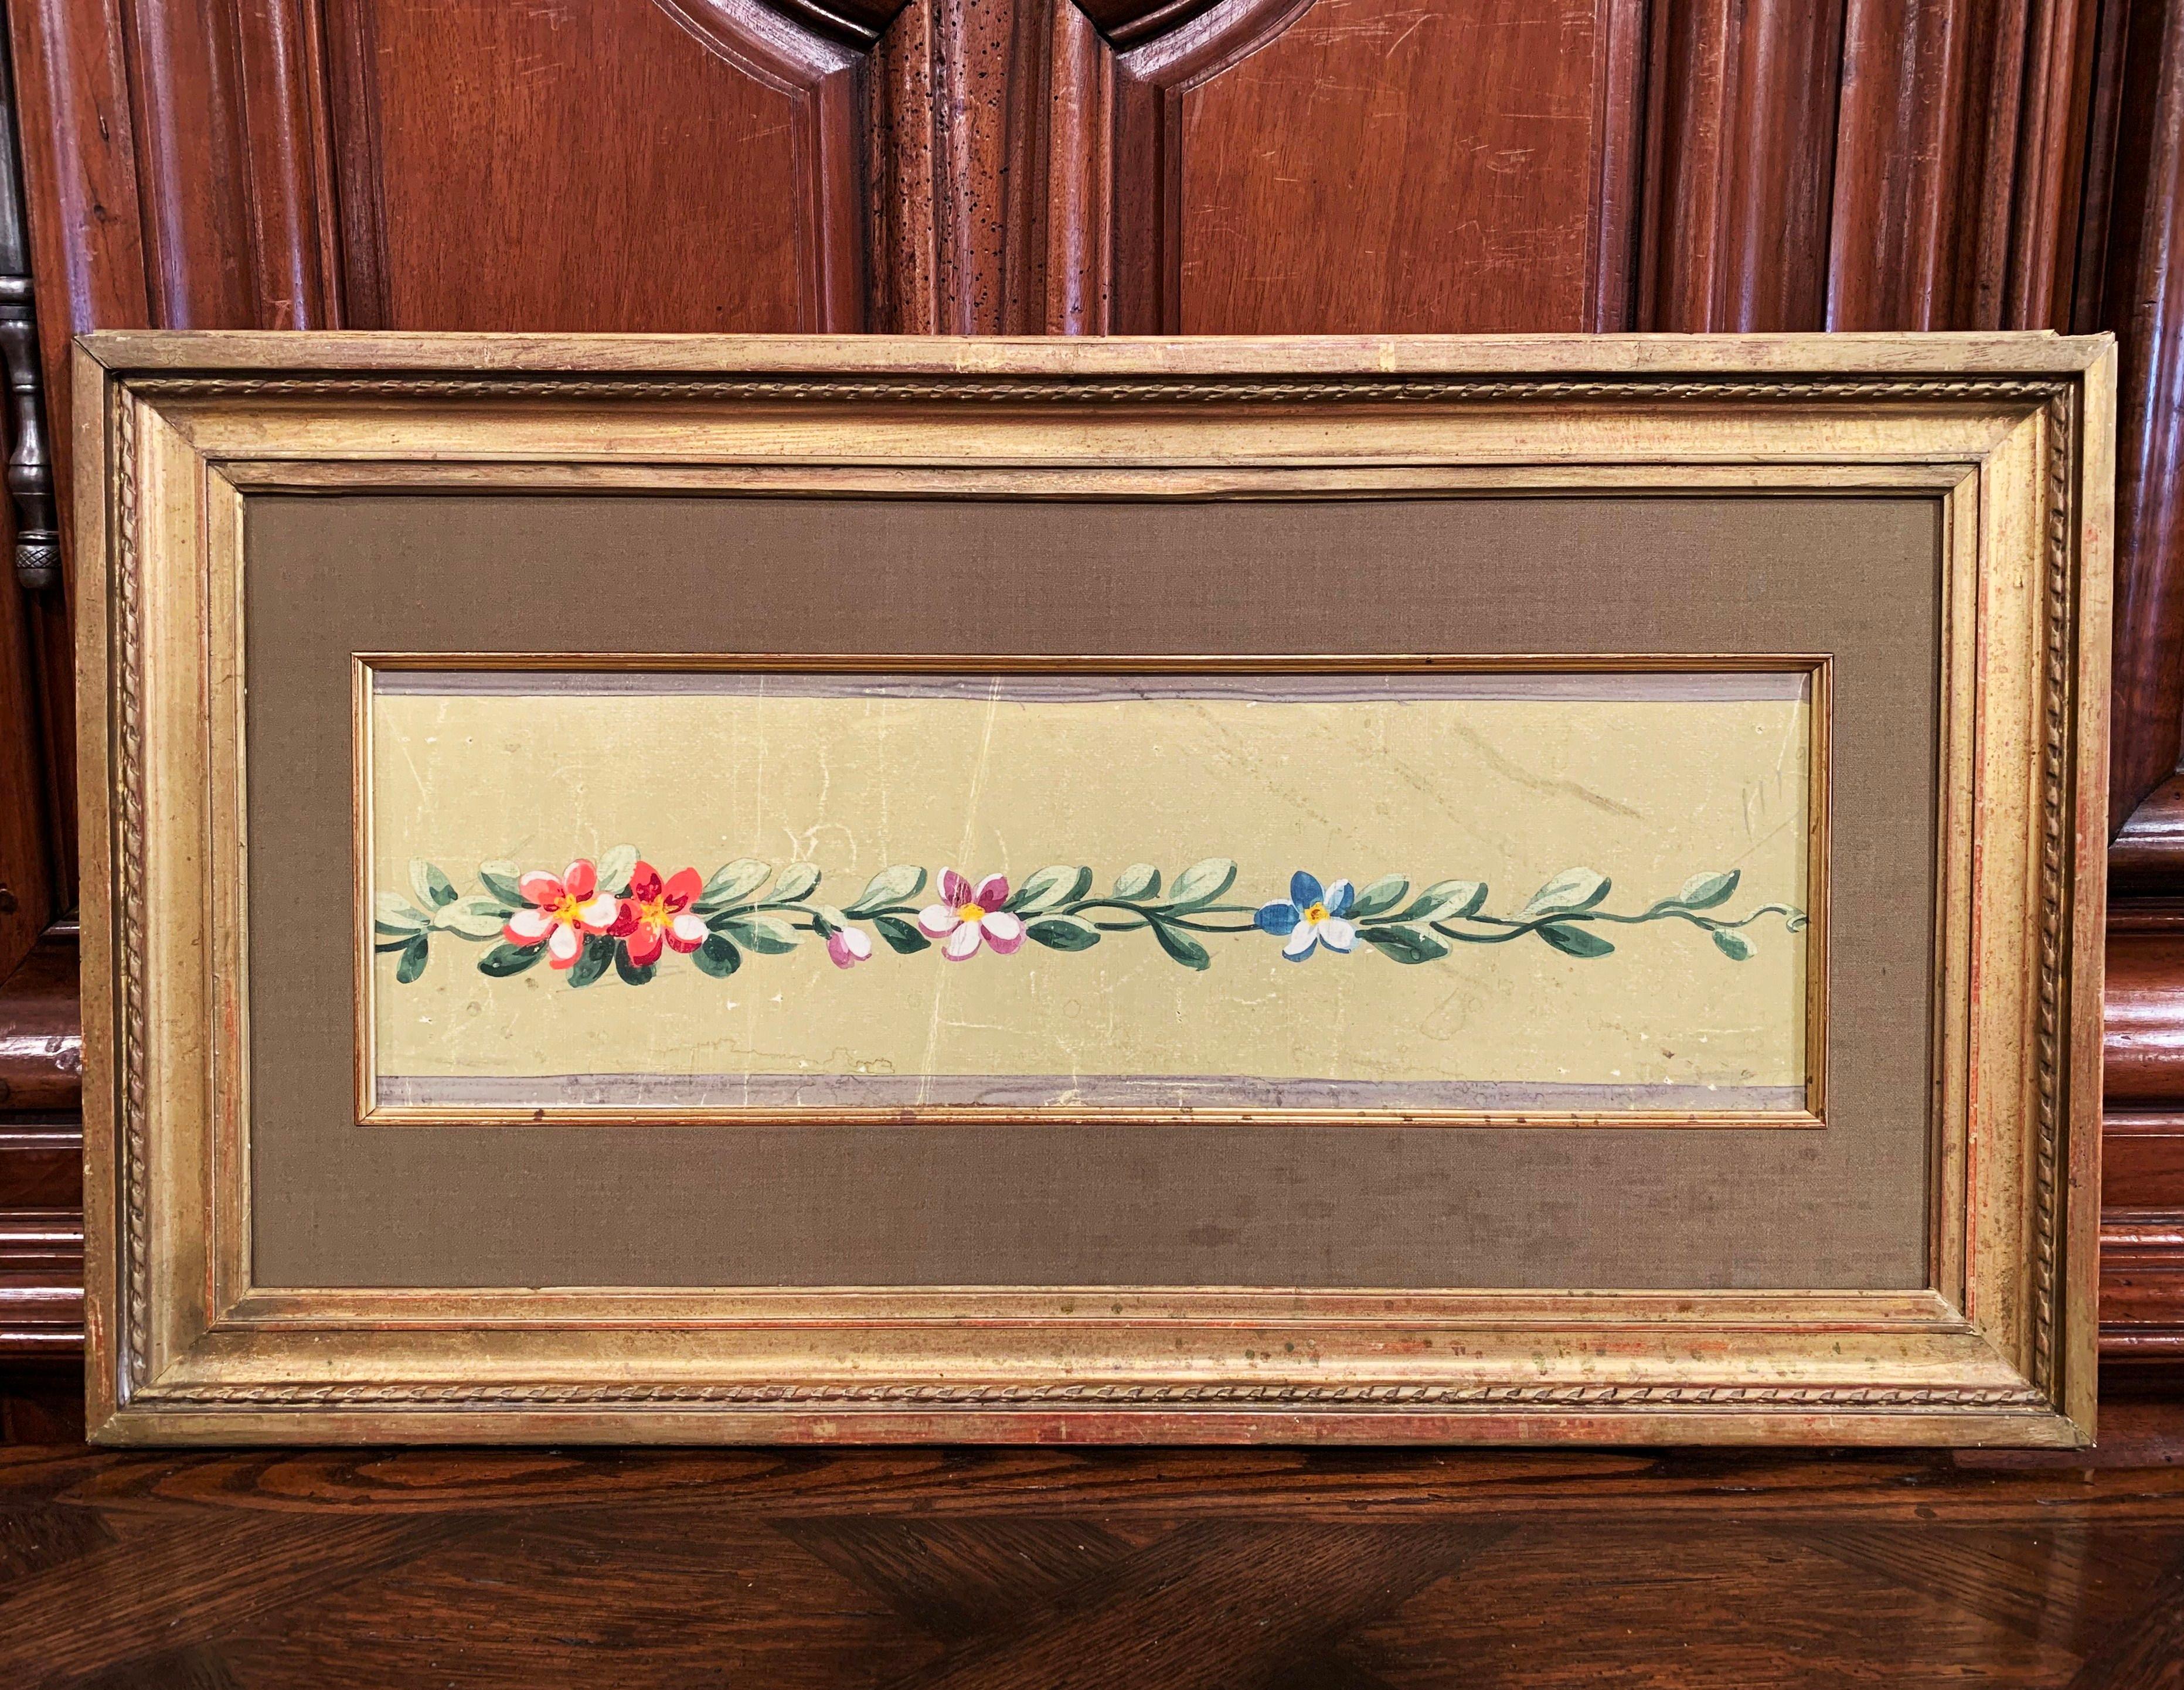 Giltwood 19th Century French Aubusson Floral Tapestry Gouache on Paper in Gilt Frame For Sale